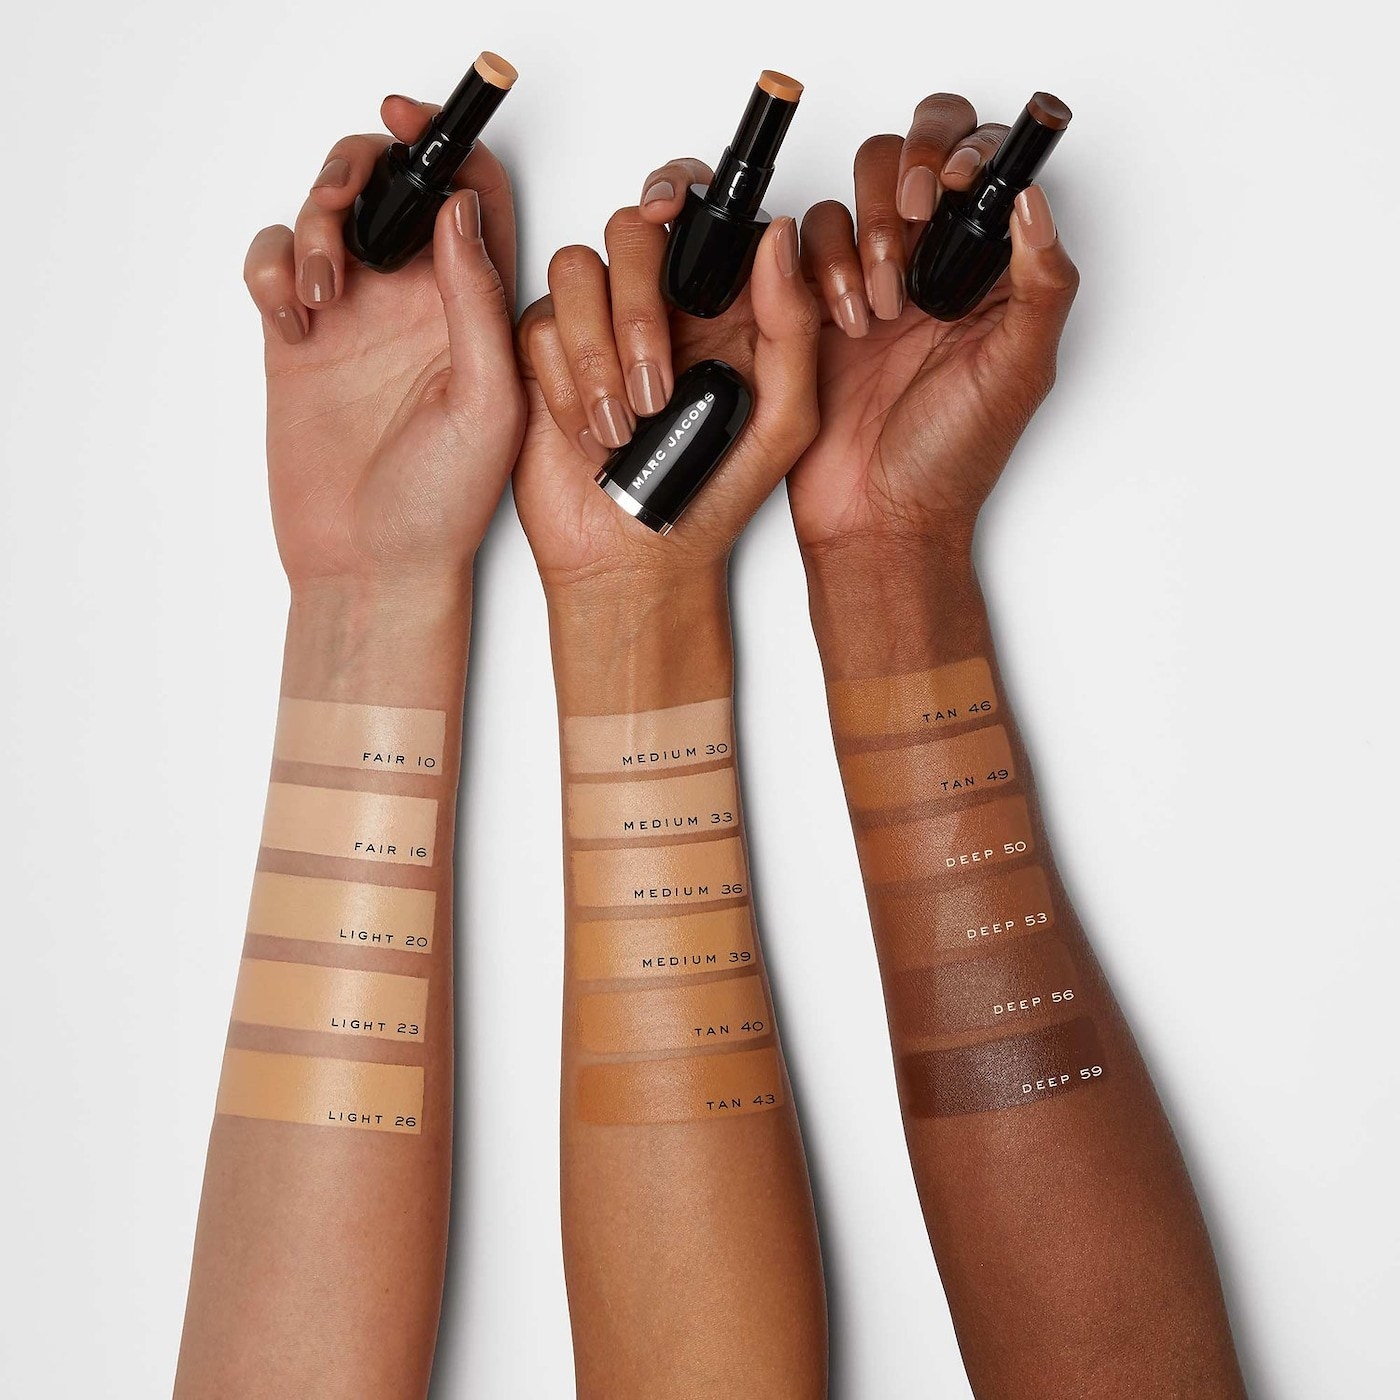 models with different skin tones wear various shades of the Marc Jacobs Beauty concealer stick on wrists